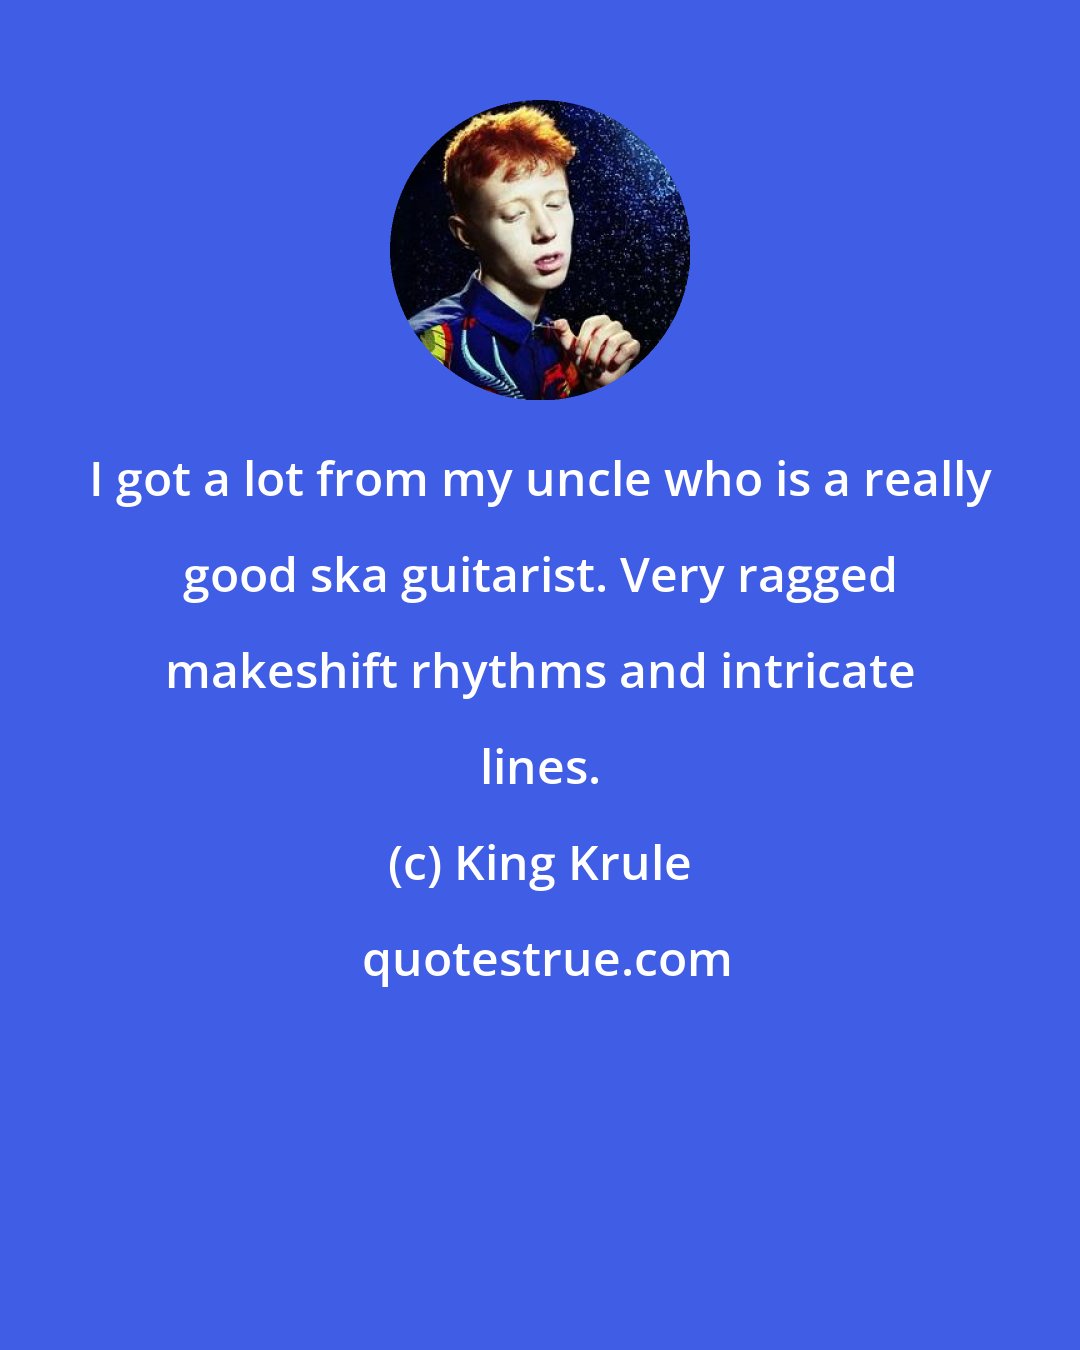 King Krule: I got a lot from my uncle who is a really good ska guitarist. Very ragged makeshift rhythms and intricate lines.